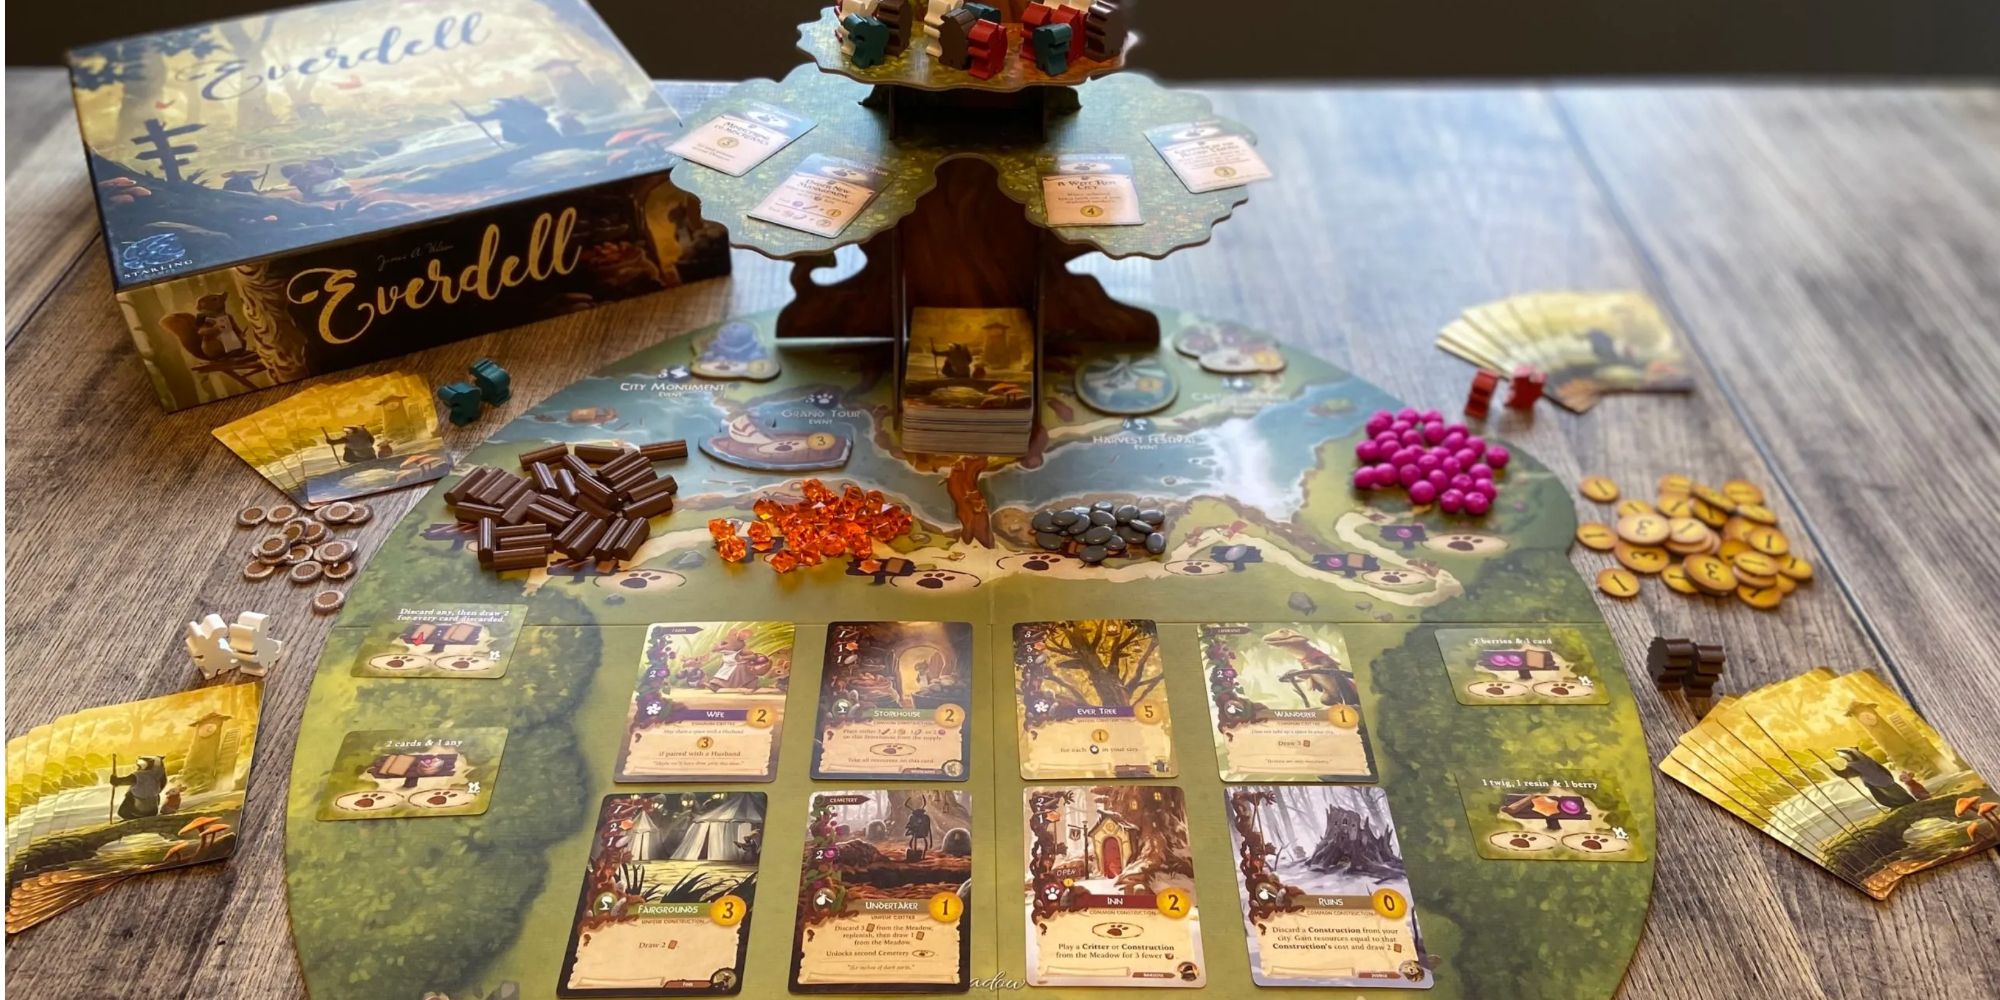 Everdell board game components laid out on a table.